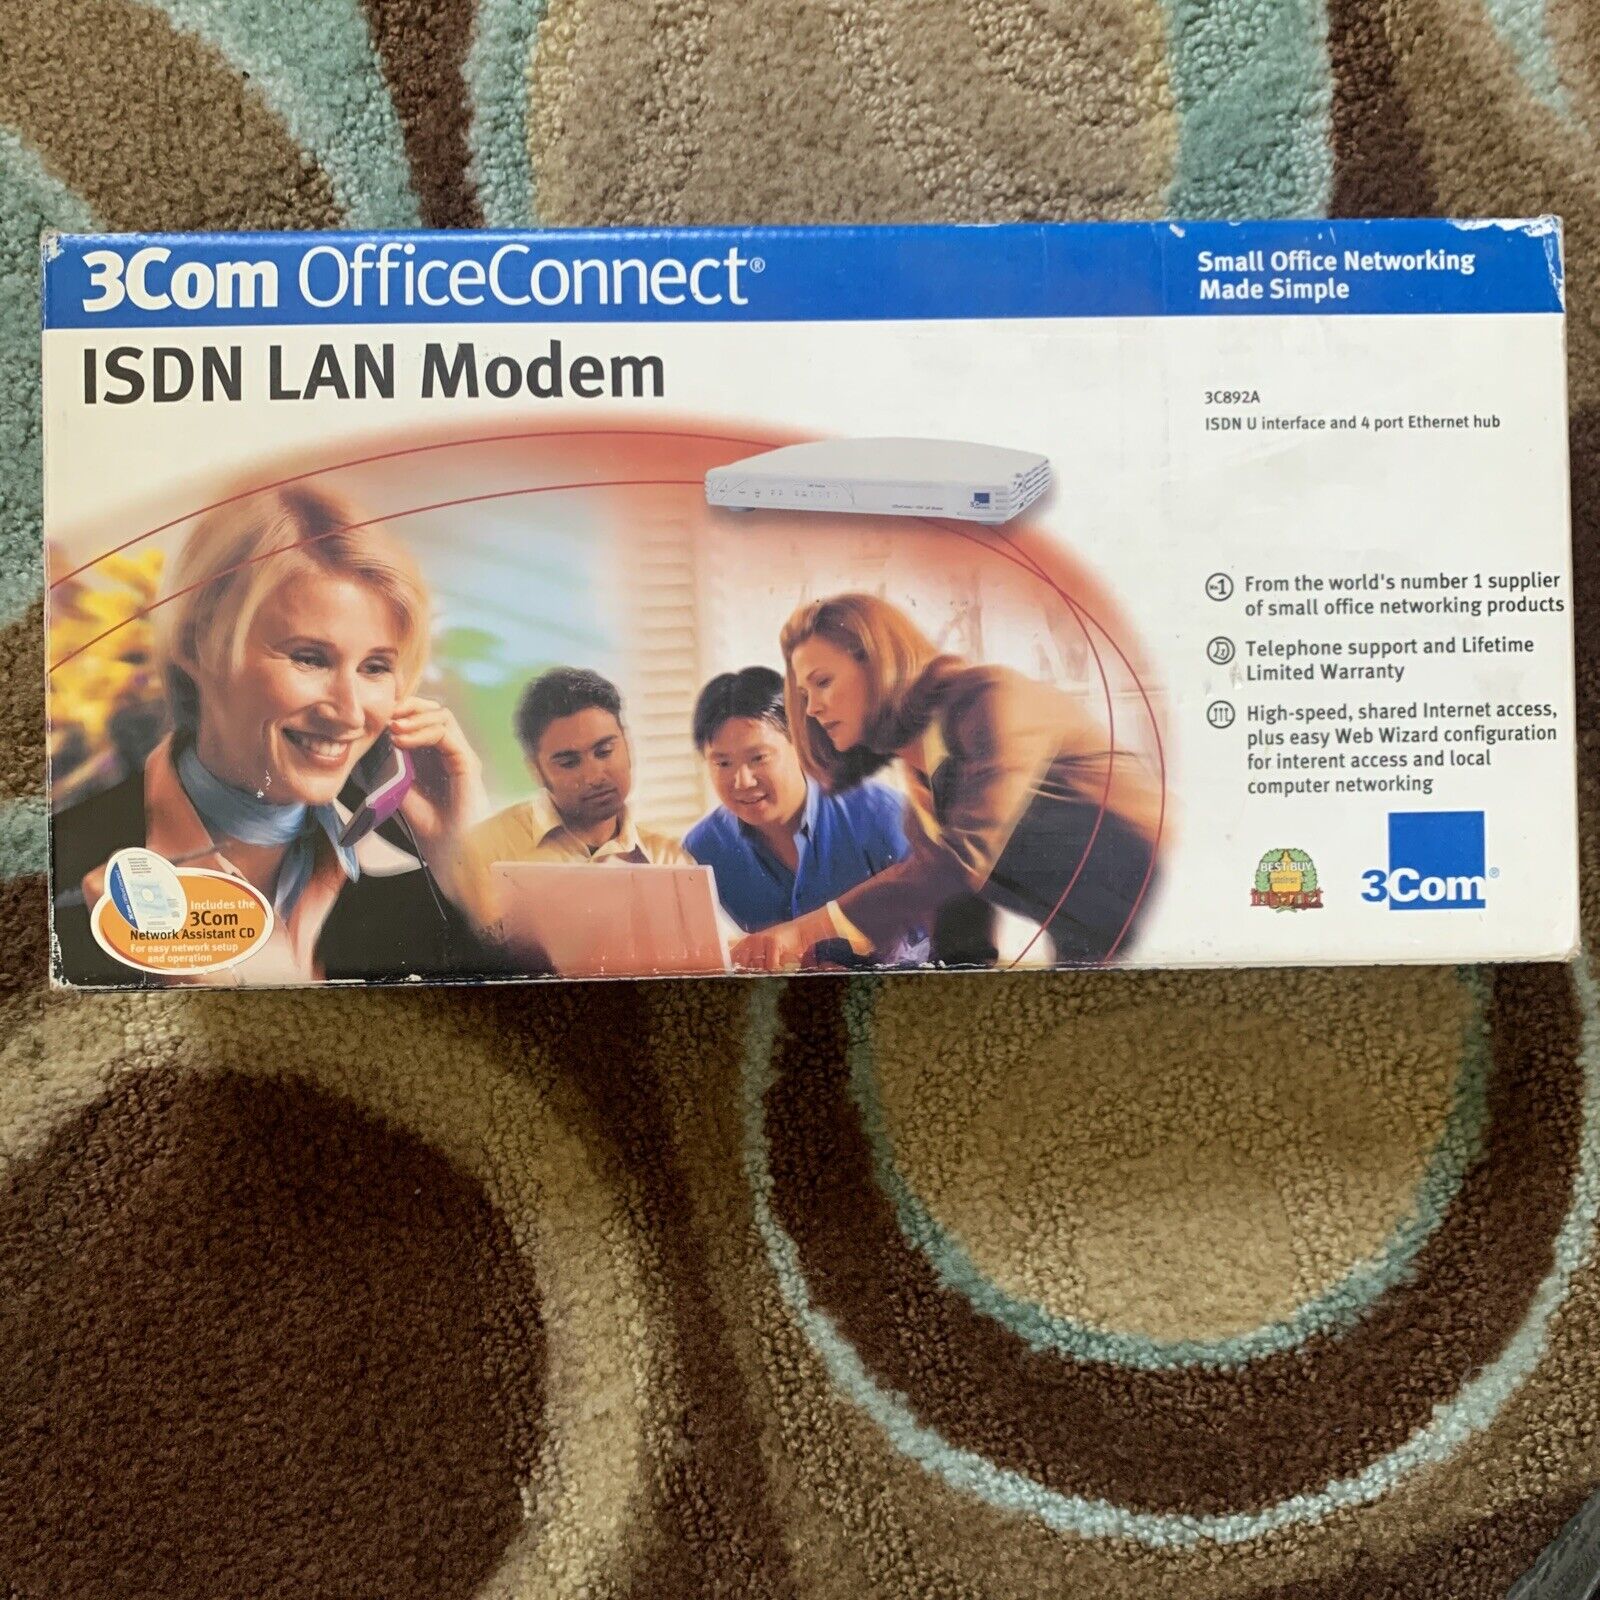 3Com OfficeConnect